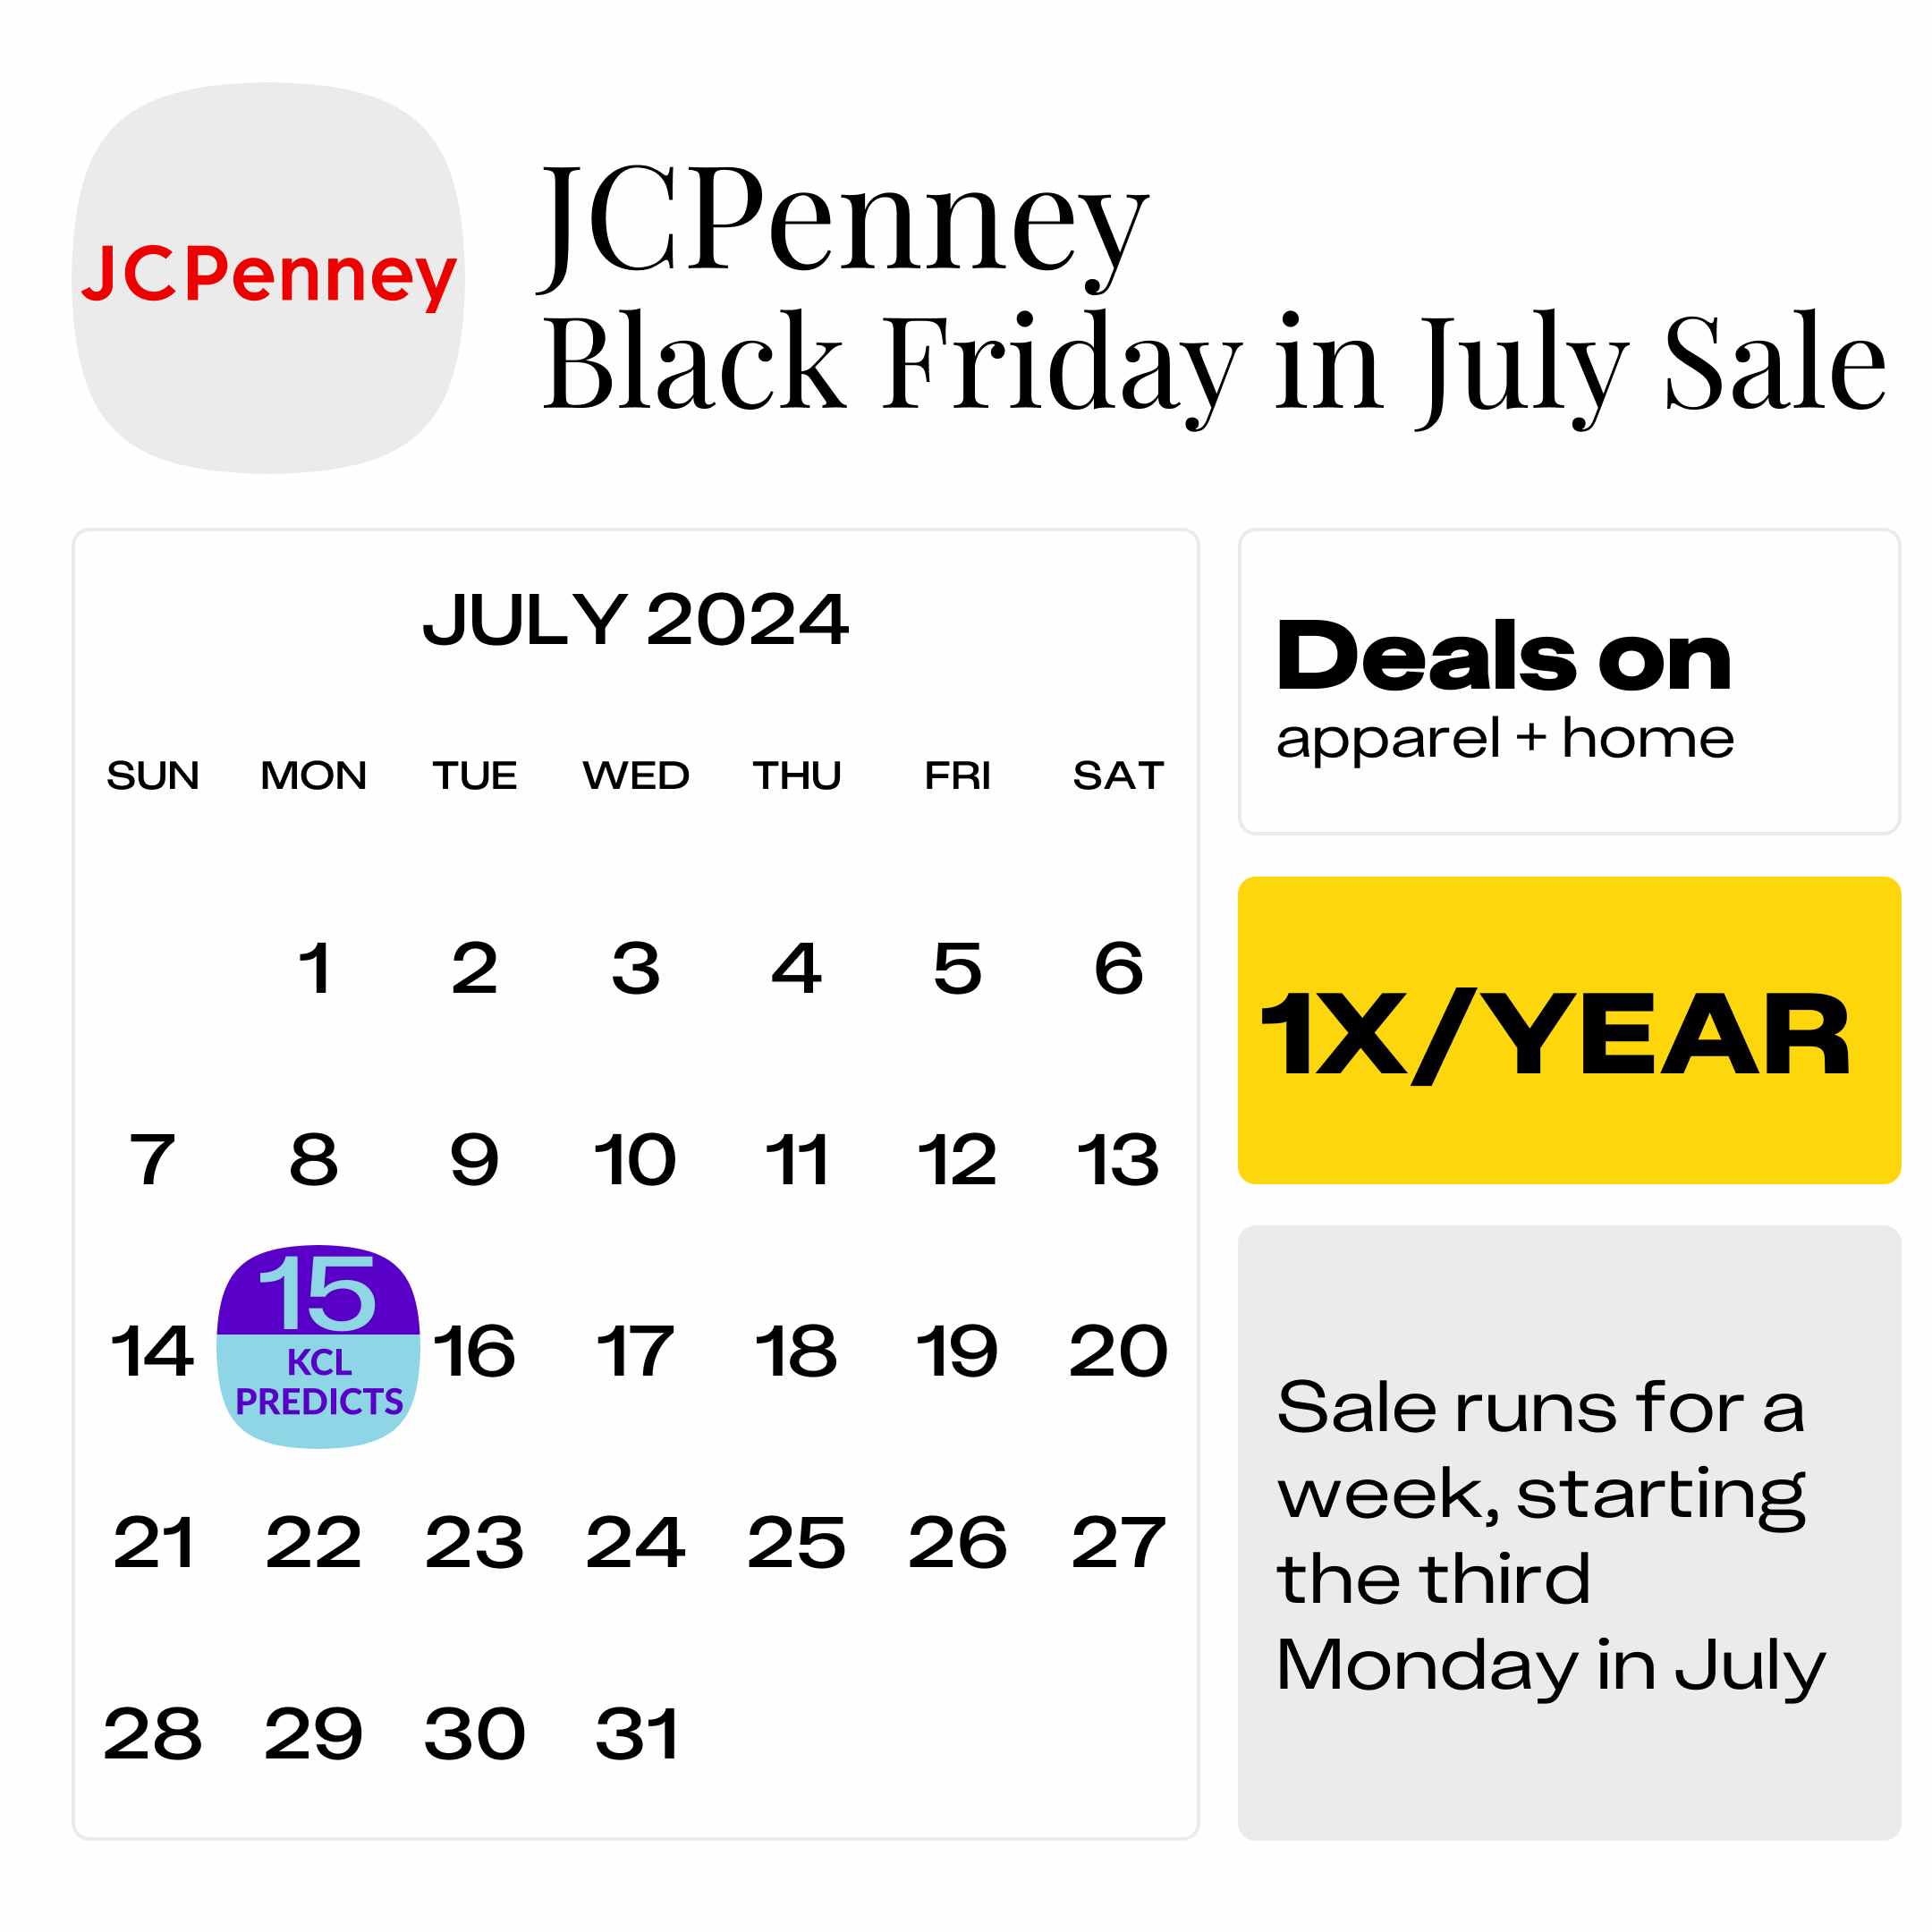 JCP-Black-Friday-in-July-Sale